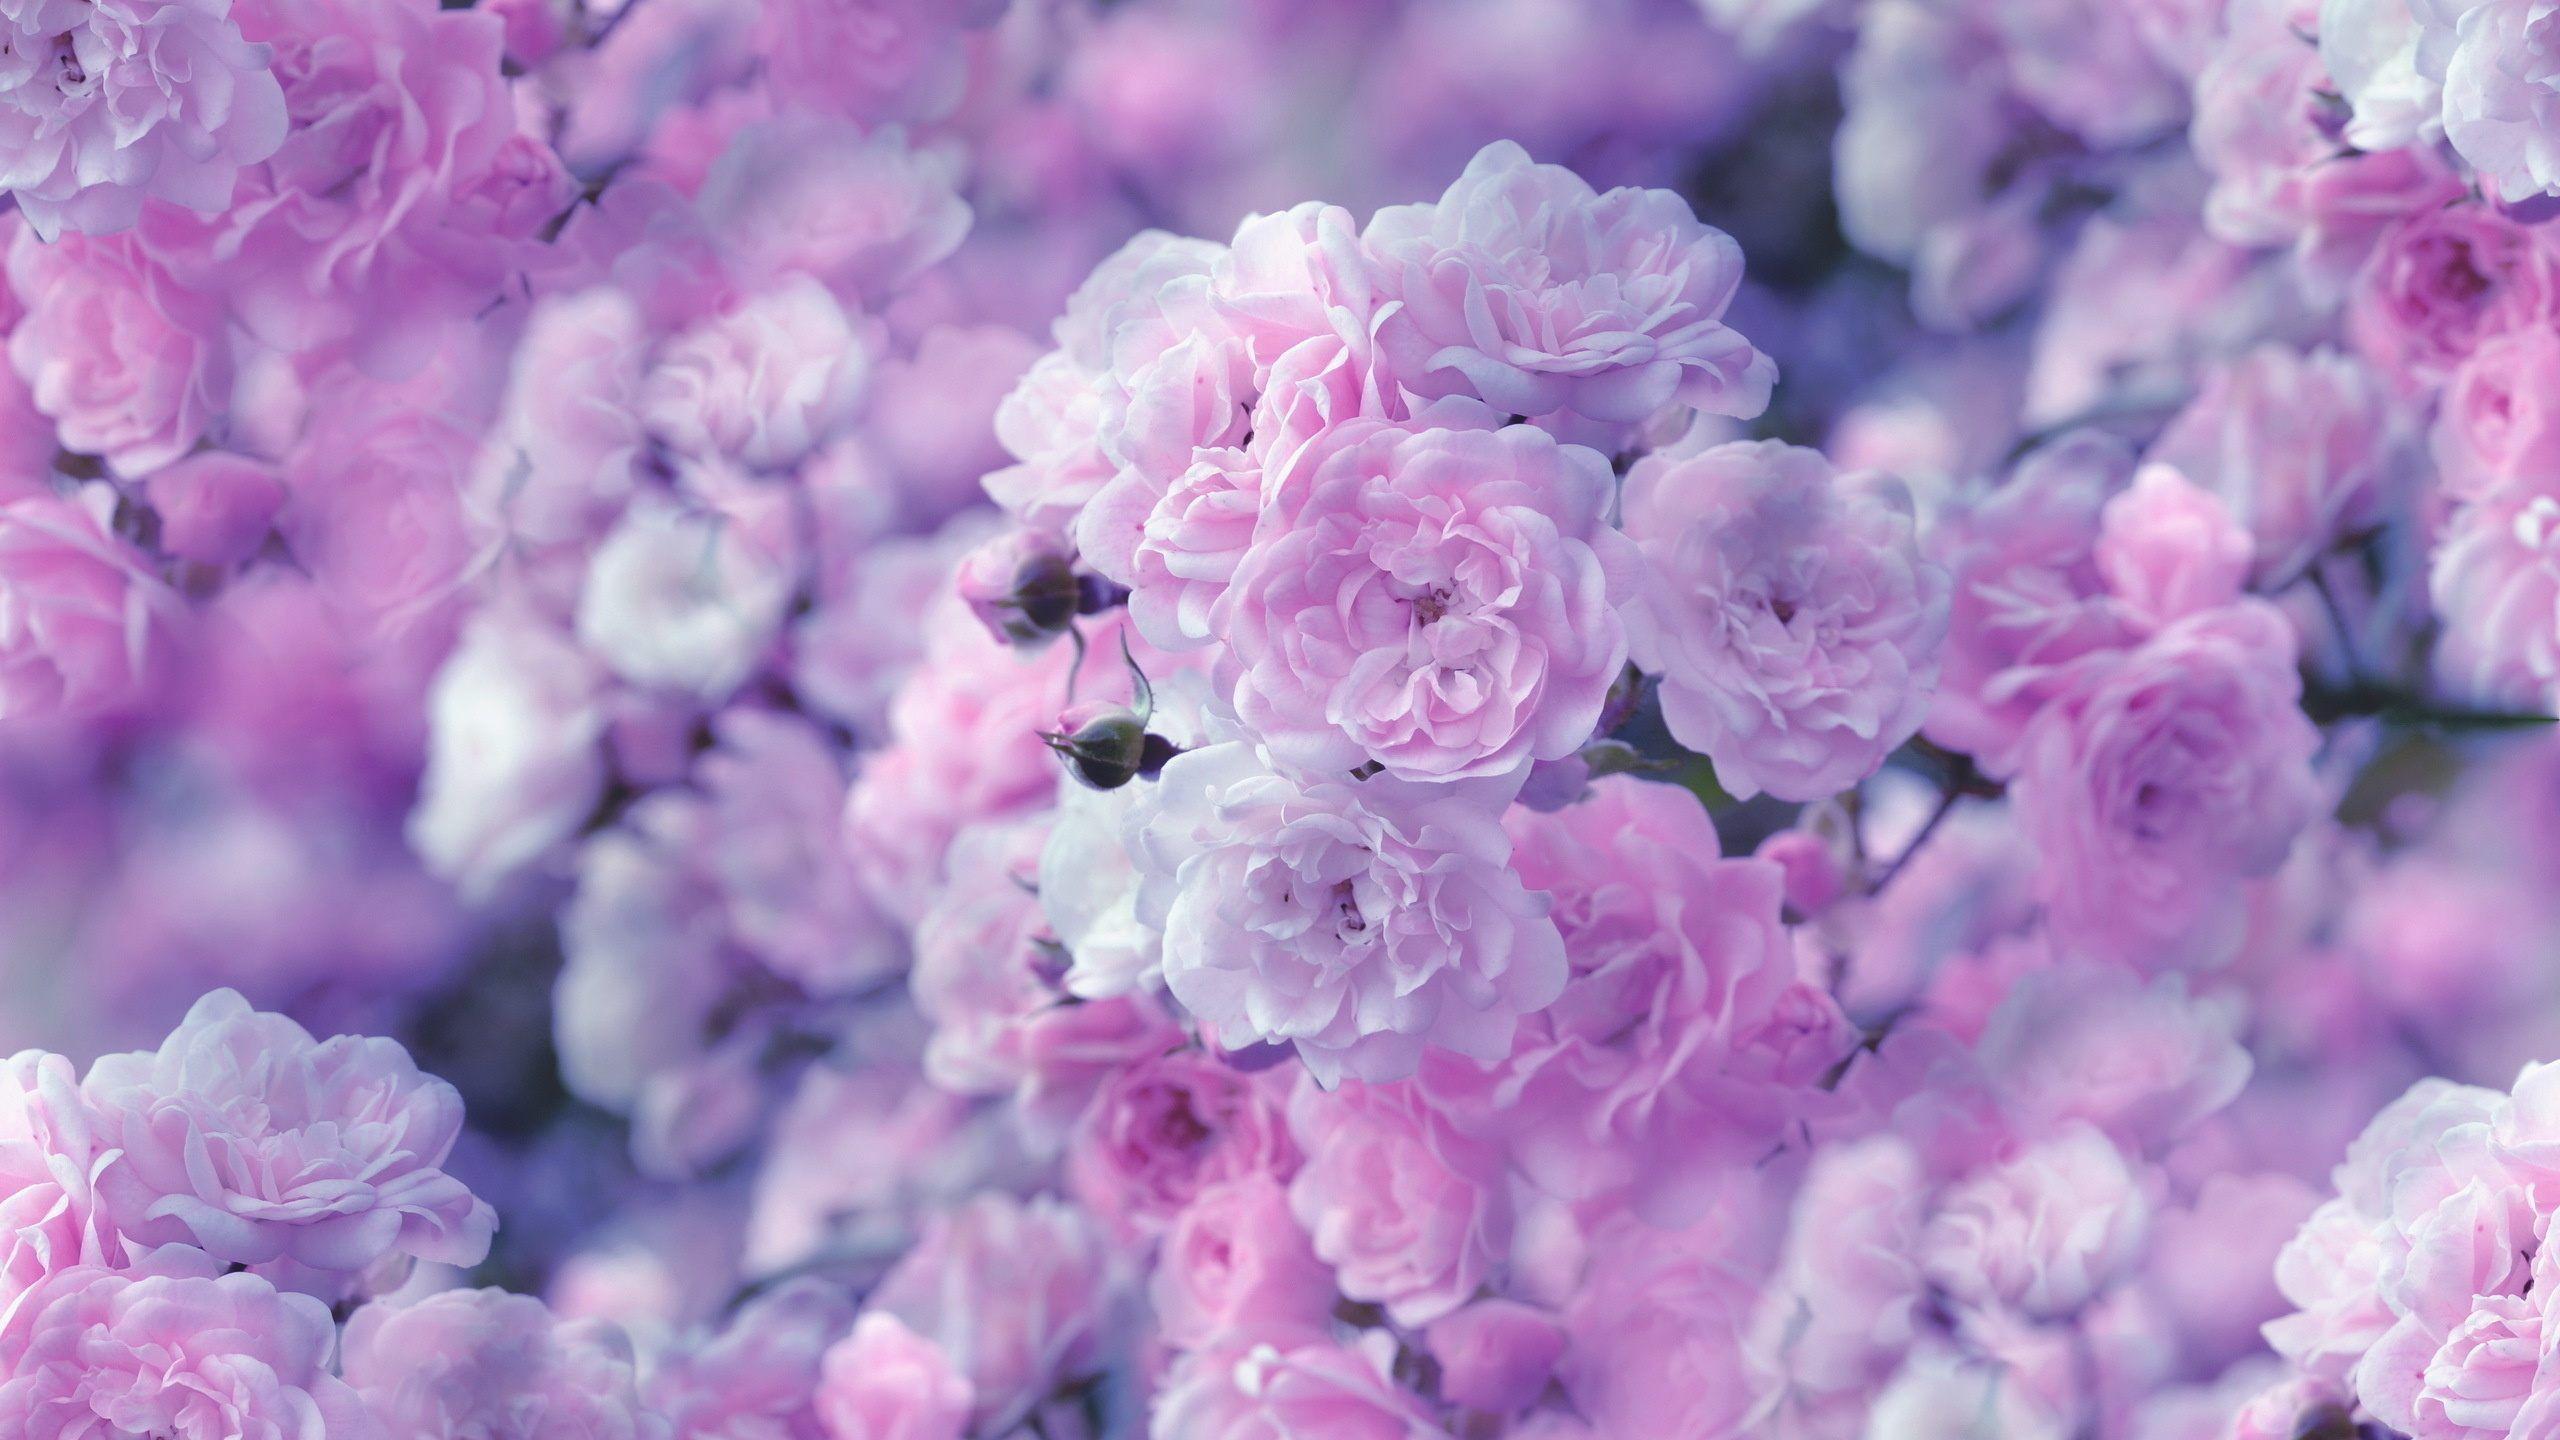 Pastel Flower Wallpapers - Top Free Pastel Flower Backgrounds